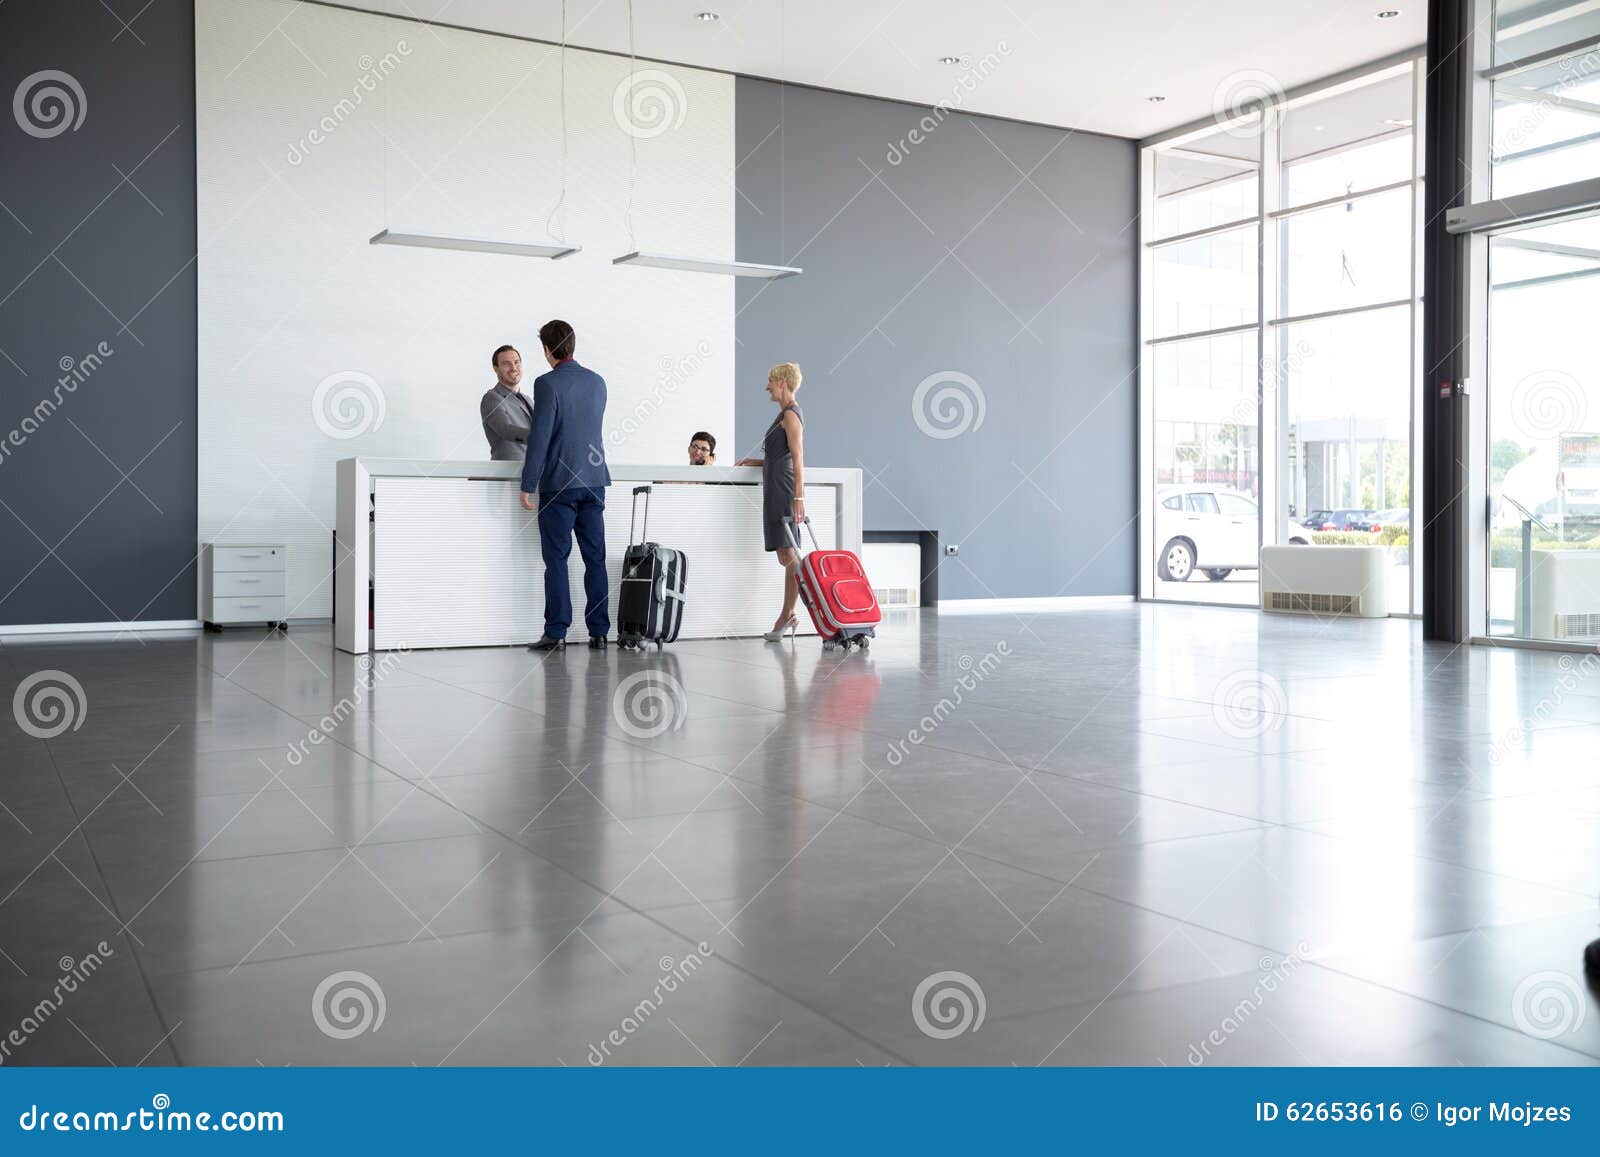 passengers checkout at hotel reception